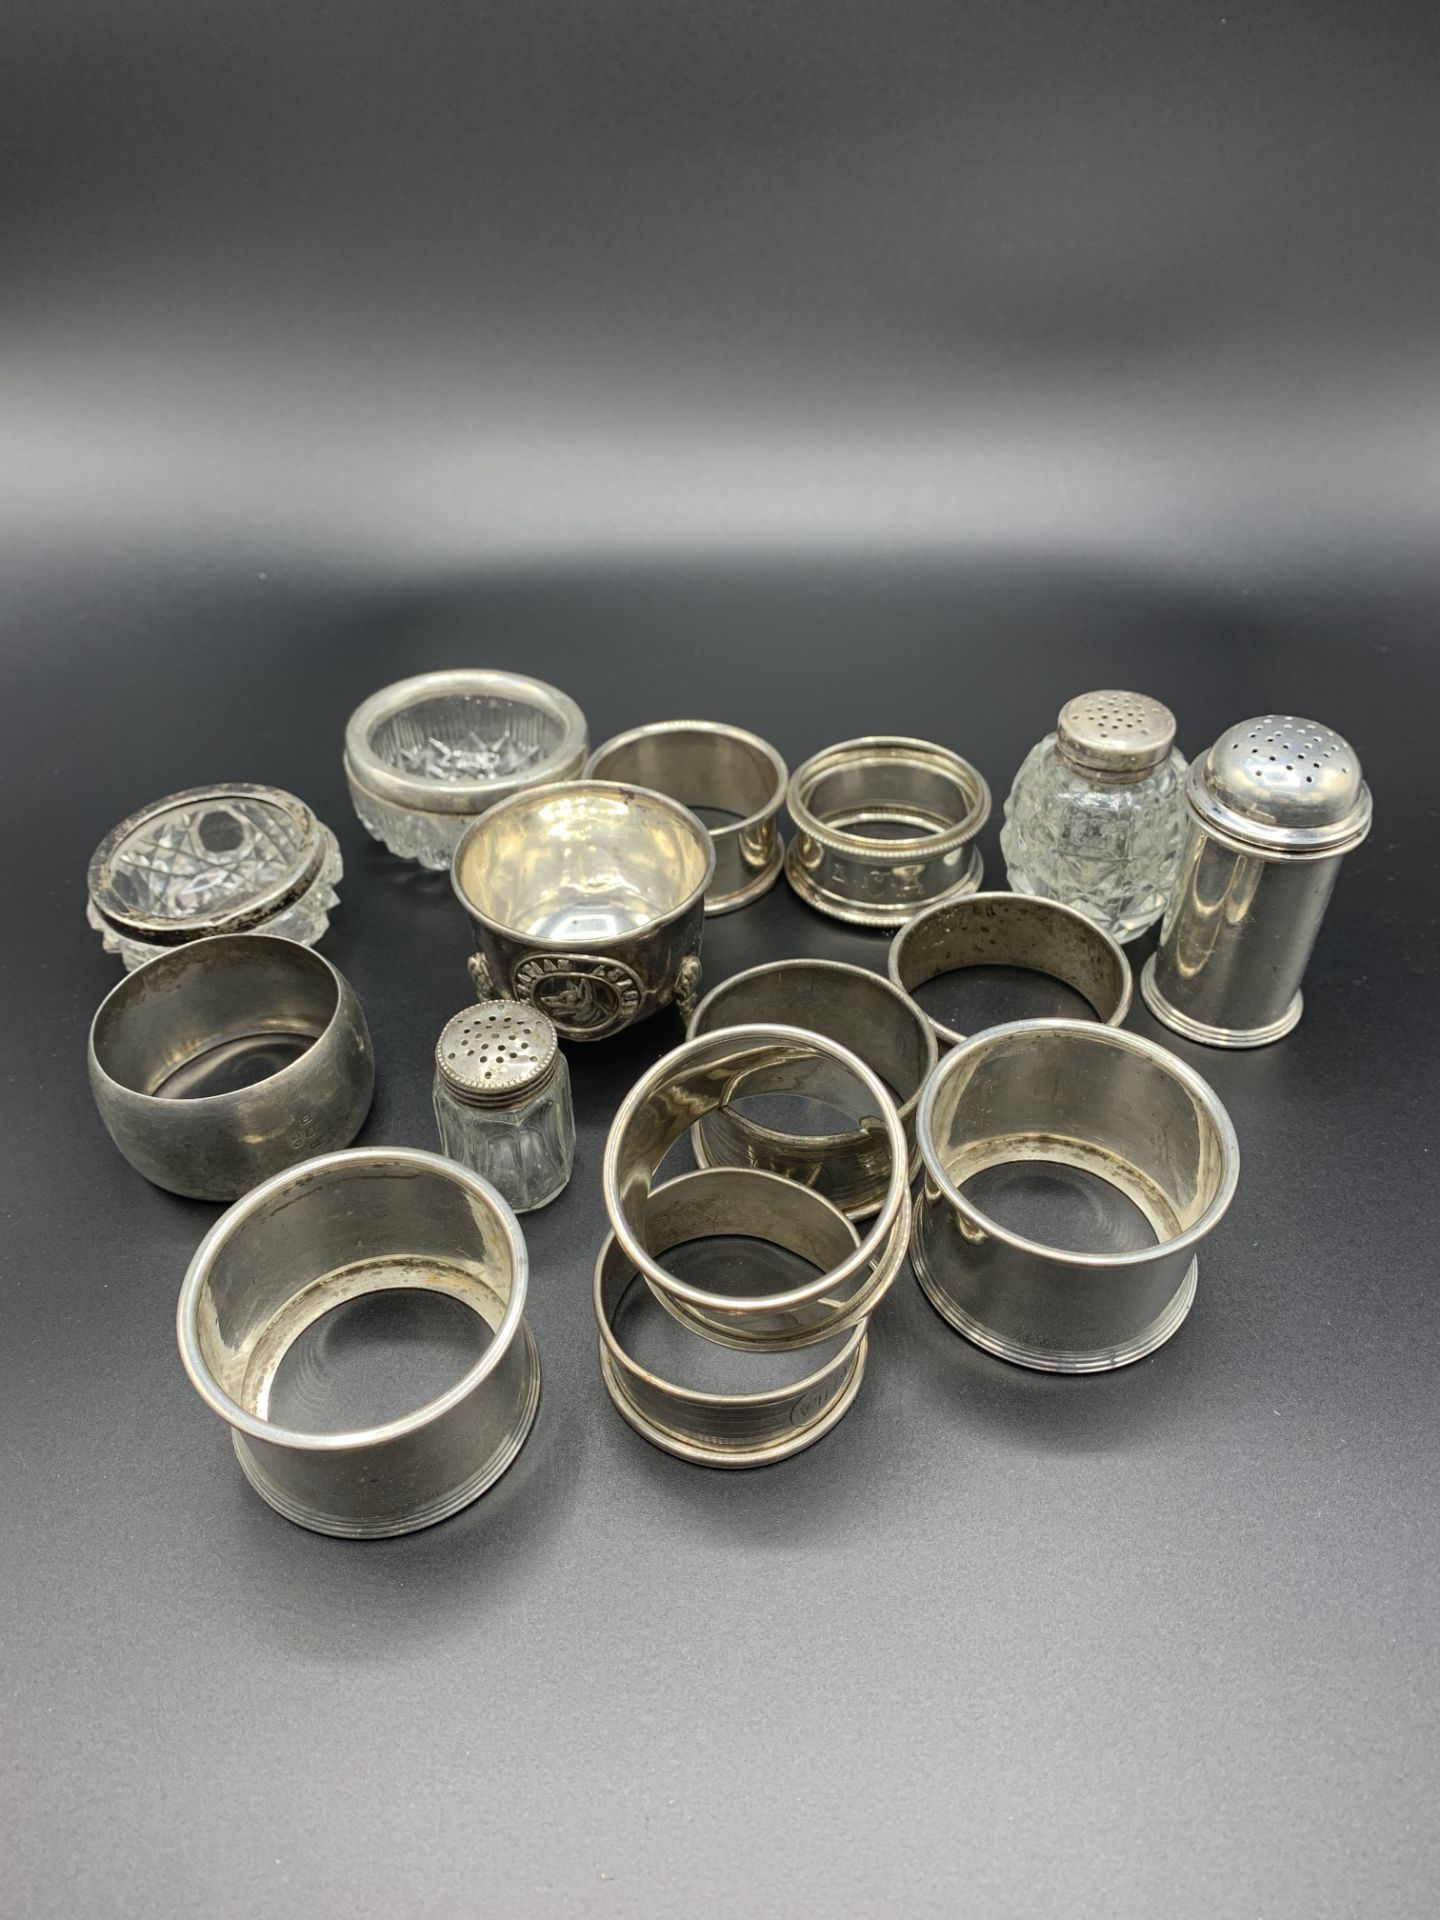 A collection of different sterling silver napkin rings and condiments